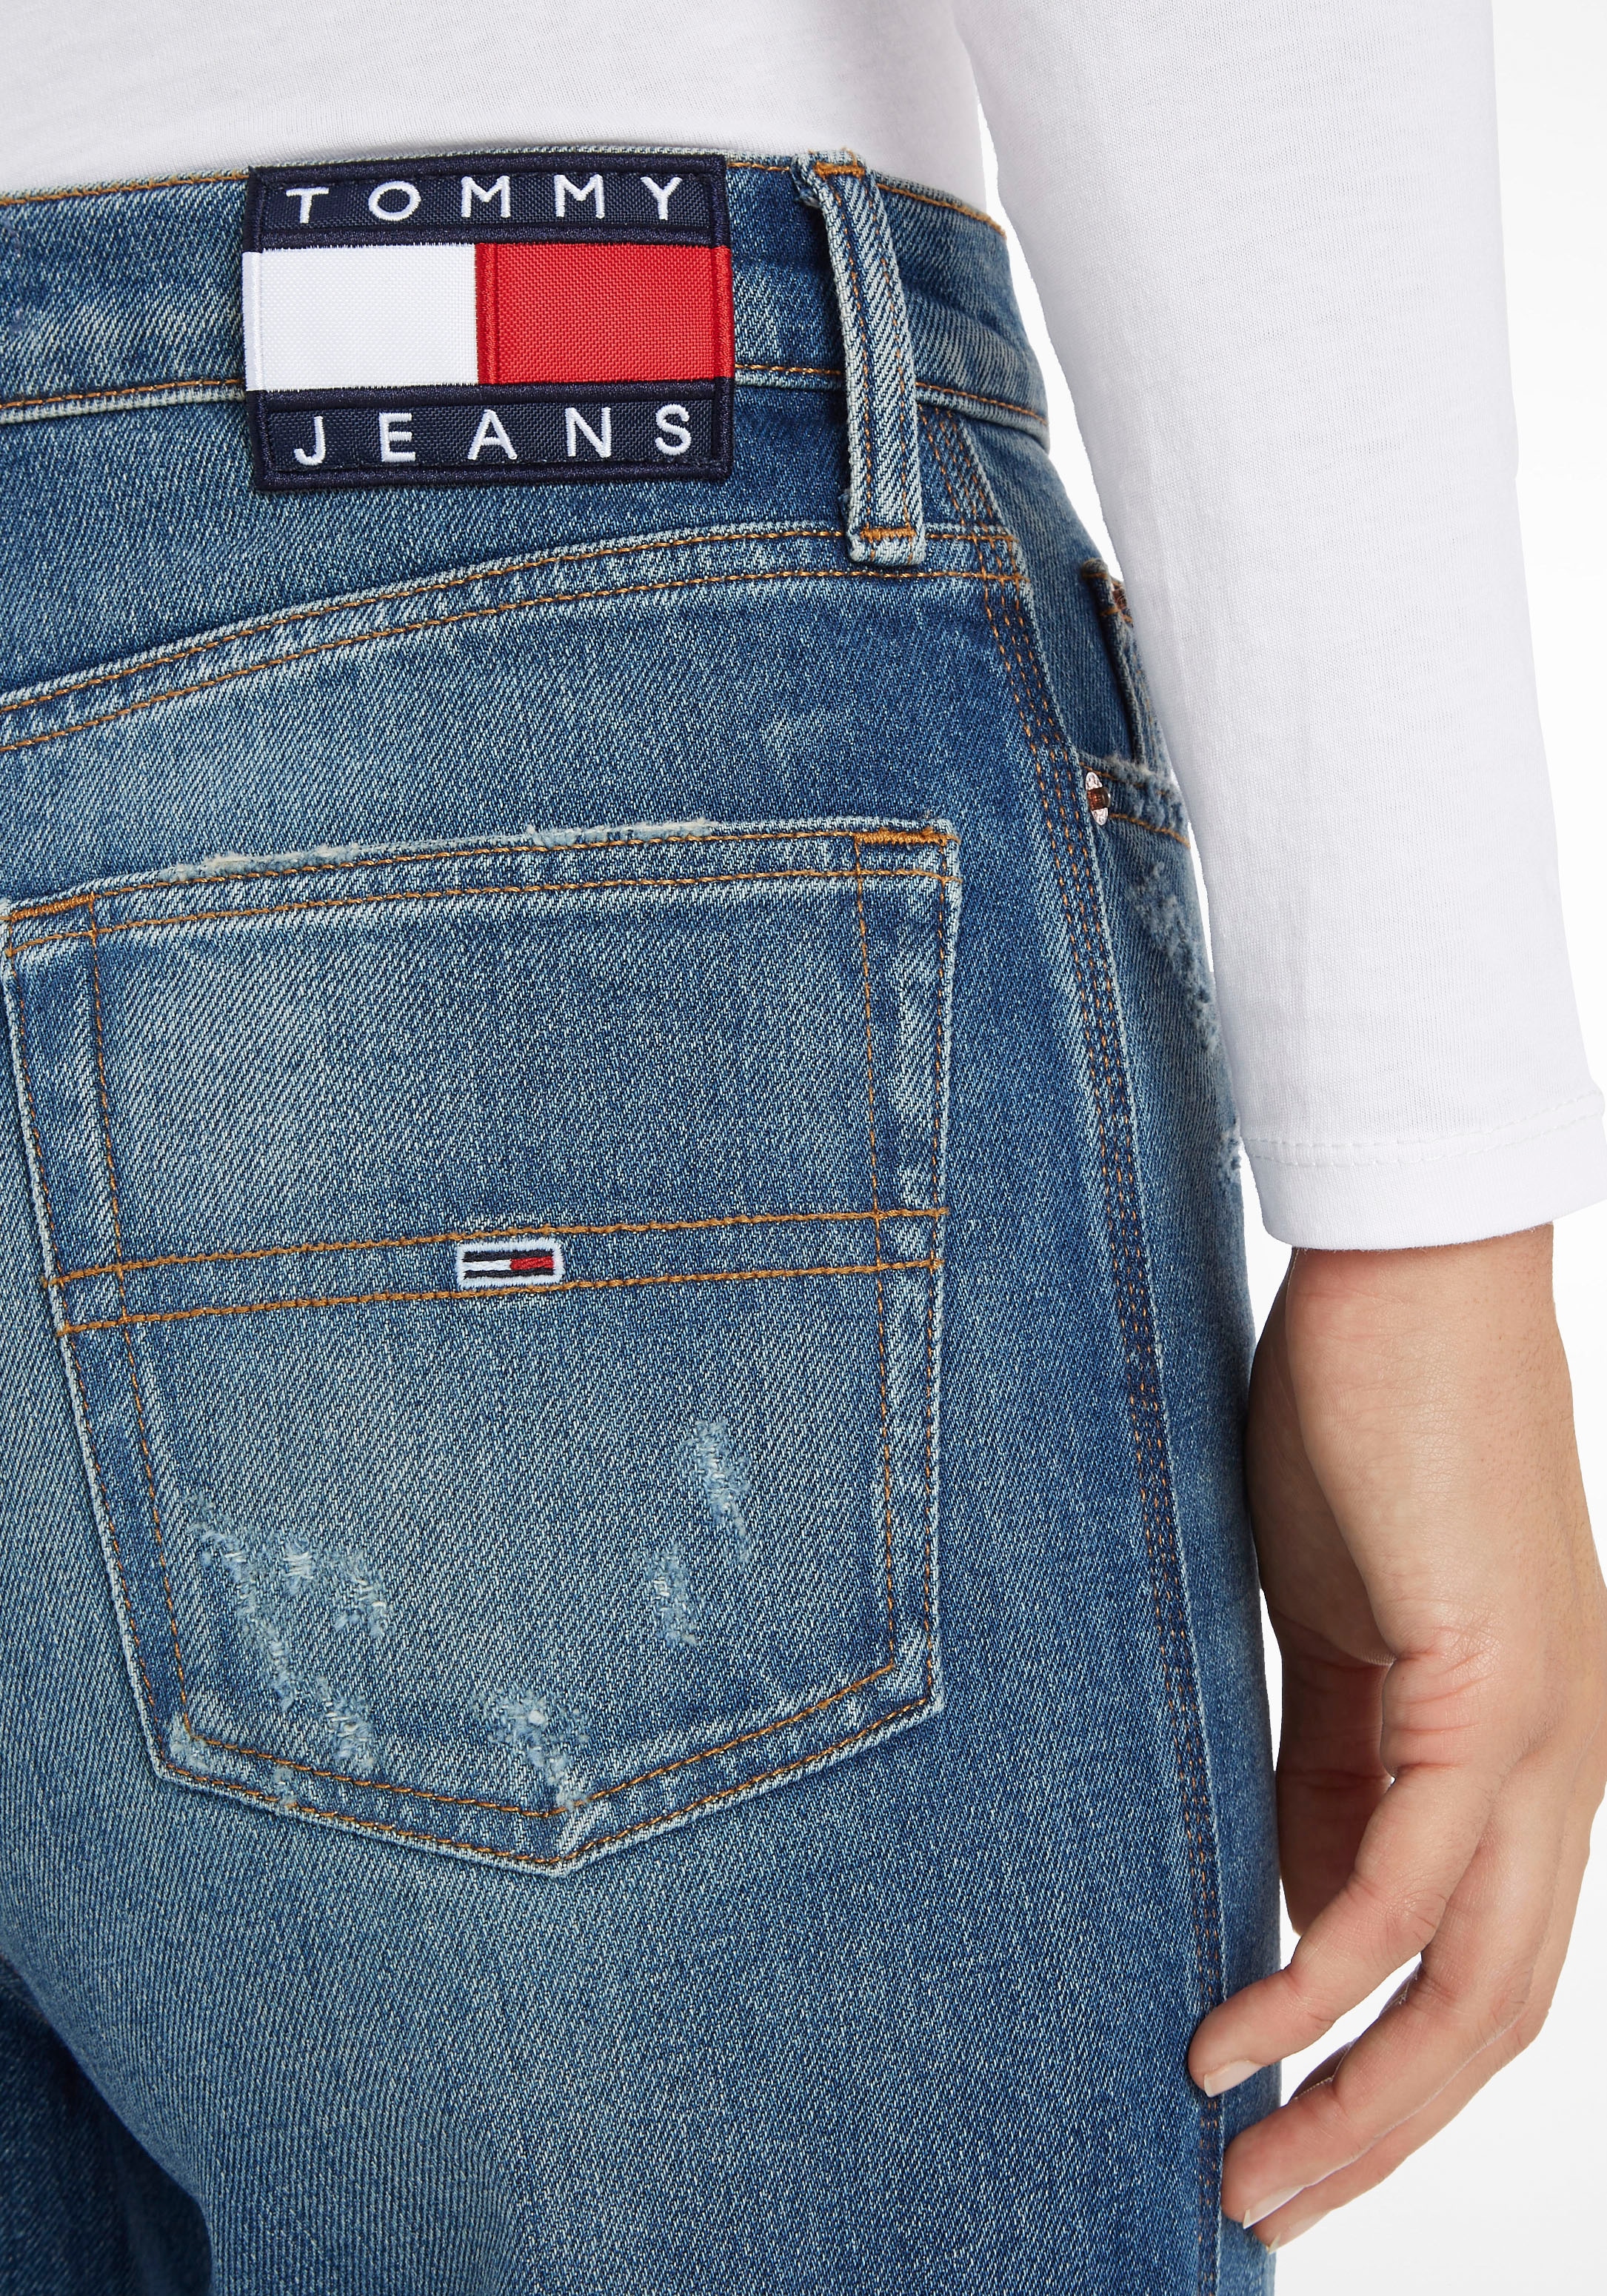 Jeans ♕ Logobadges bei Weite Tommy Jeans, mit Jeans Tommy